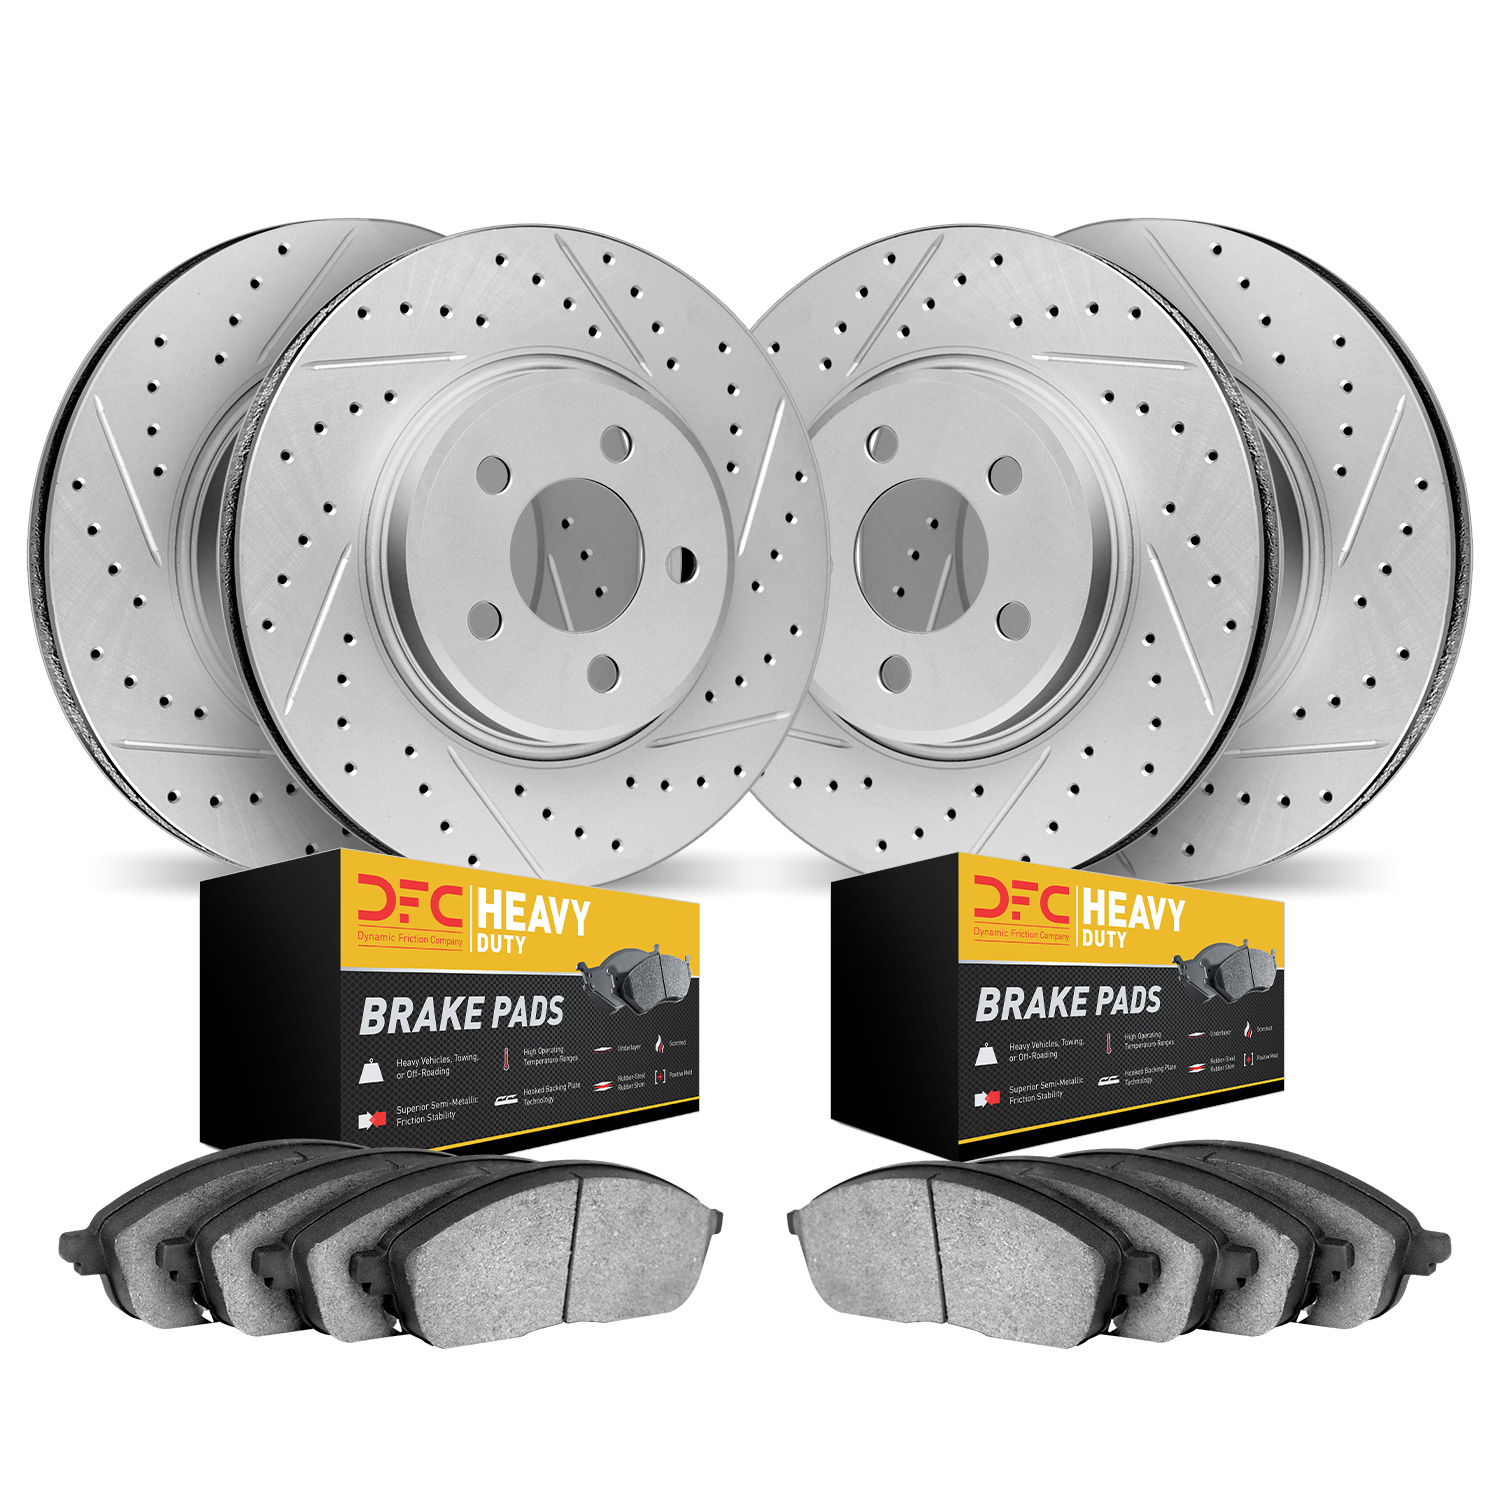 2204-39016 Geoperformance Drilled/Slotted Rotors w/Heavy-Duty Pads Kit, Fits Select Mopar, Position: Front and Rear